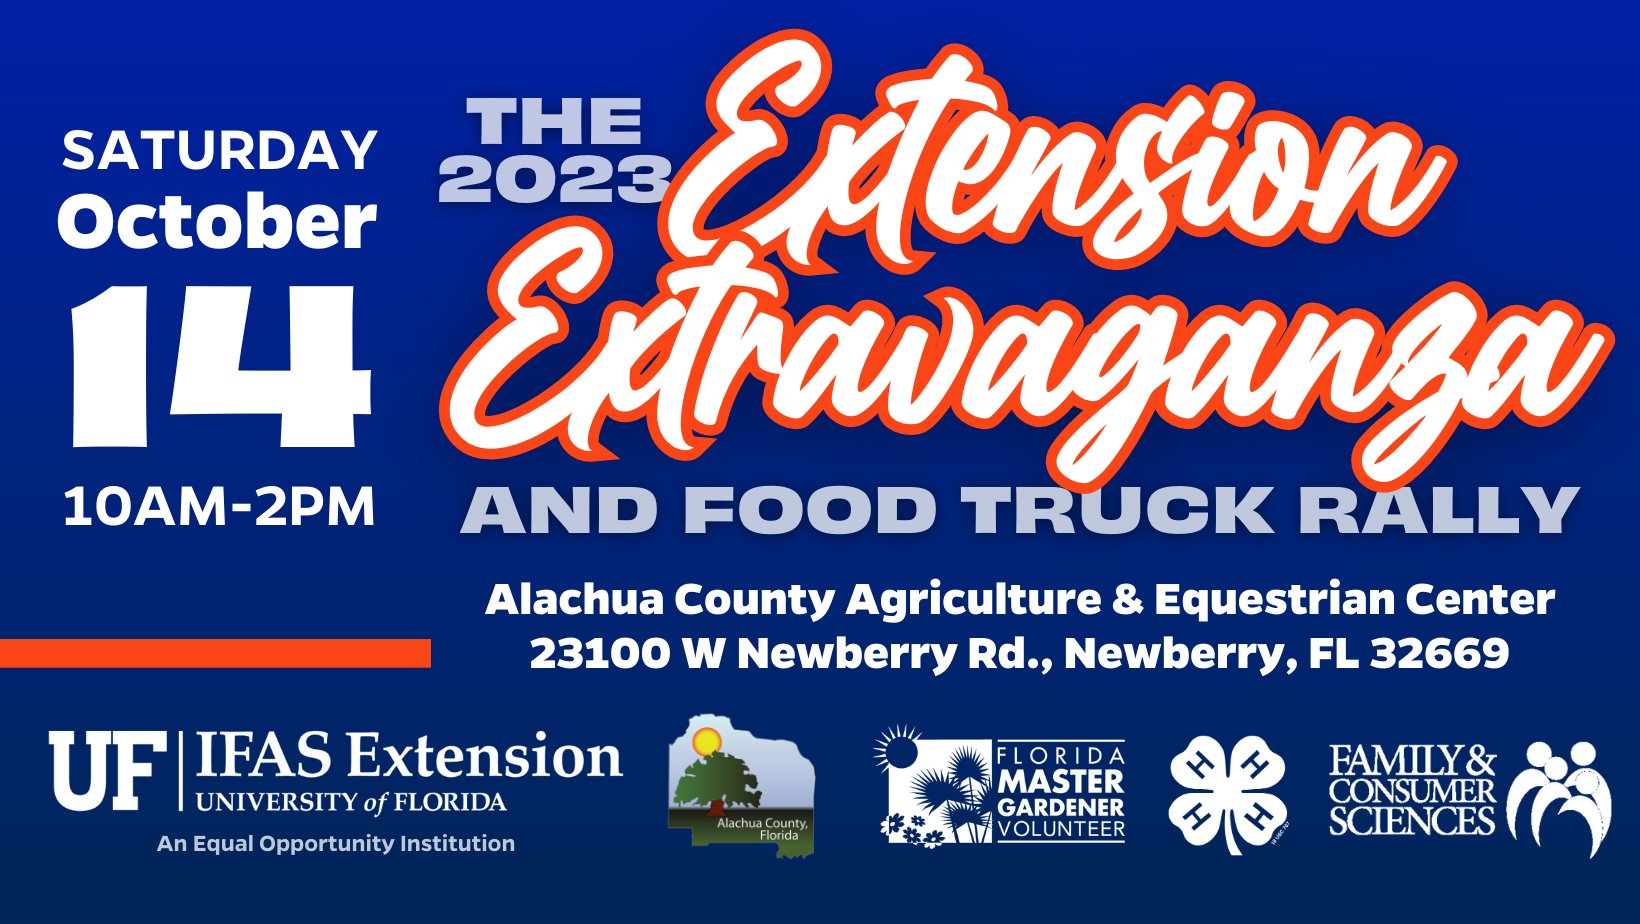 2023 Extension Extravaganza and Food Truck Rally